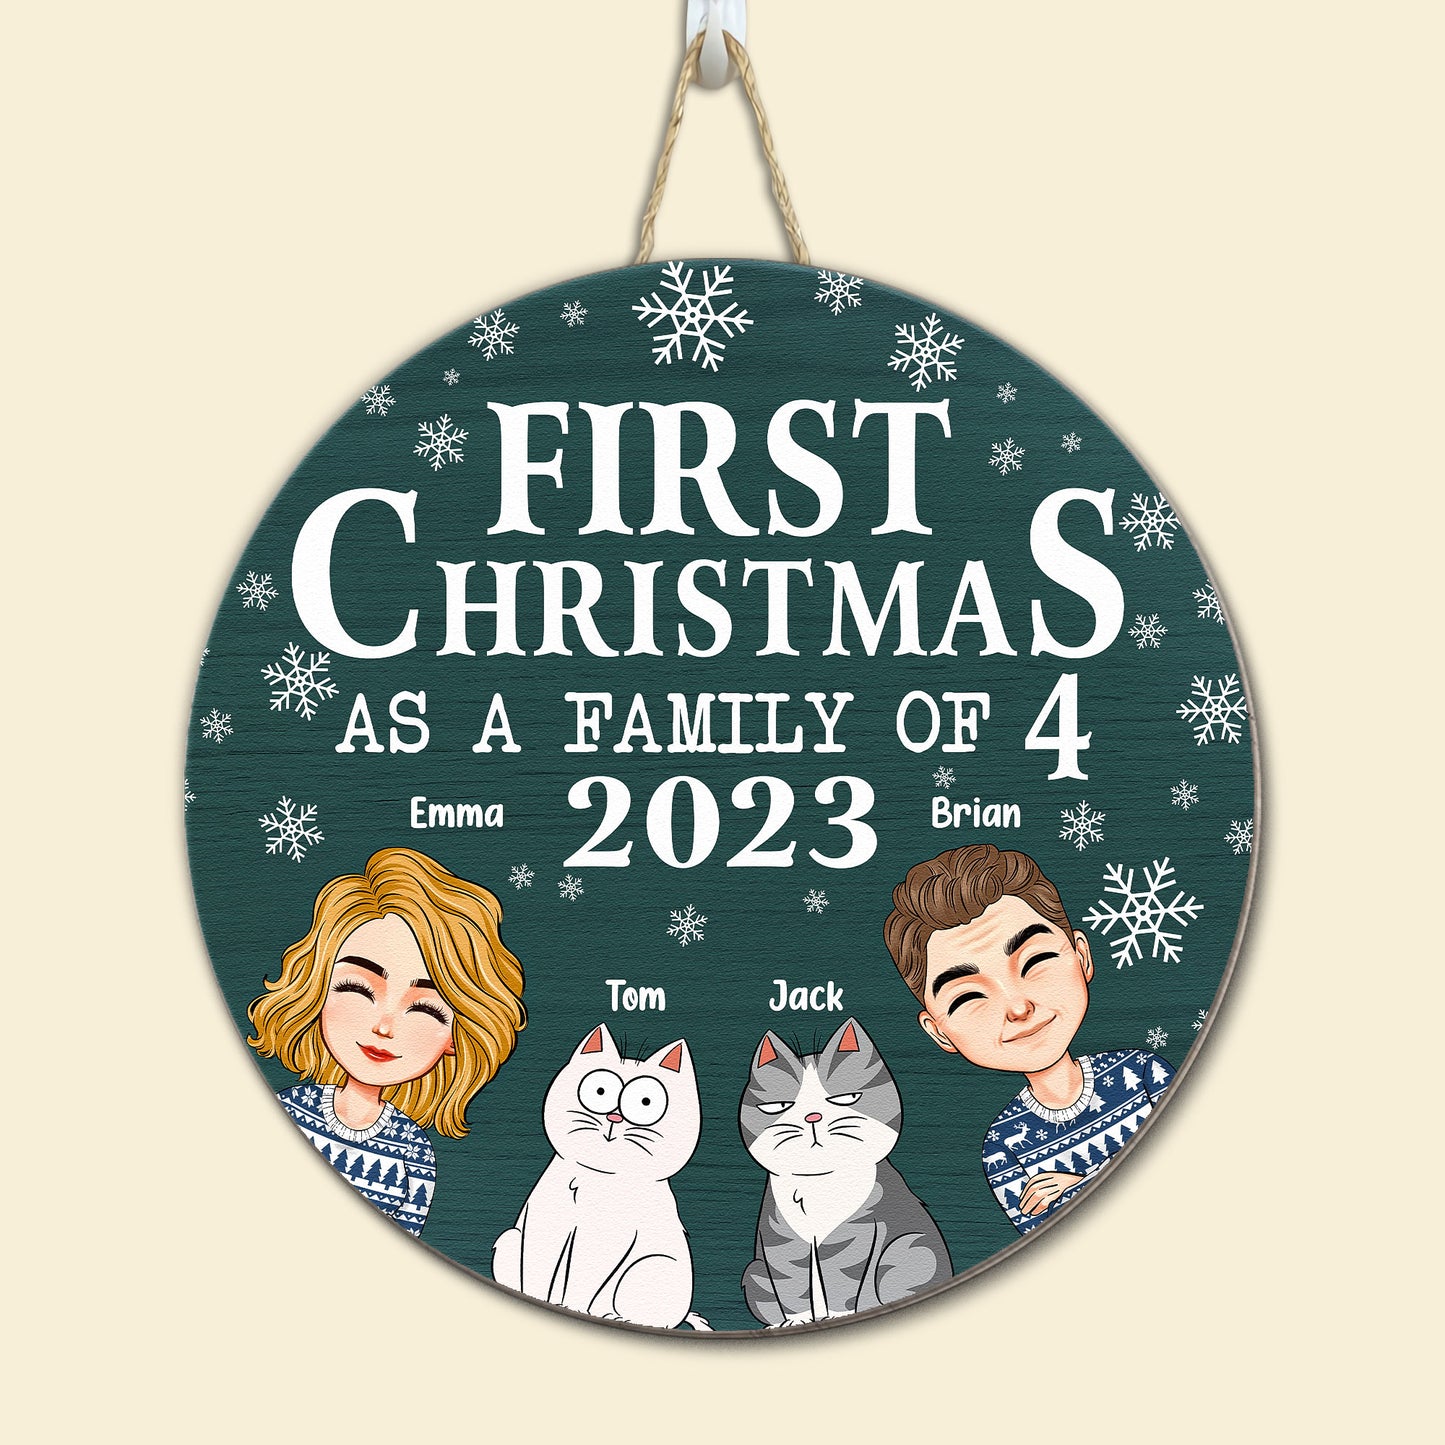 First Christmas As A Family With Cats - Personalized Wood Wreath